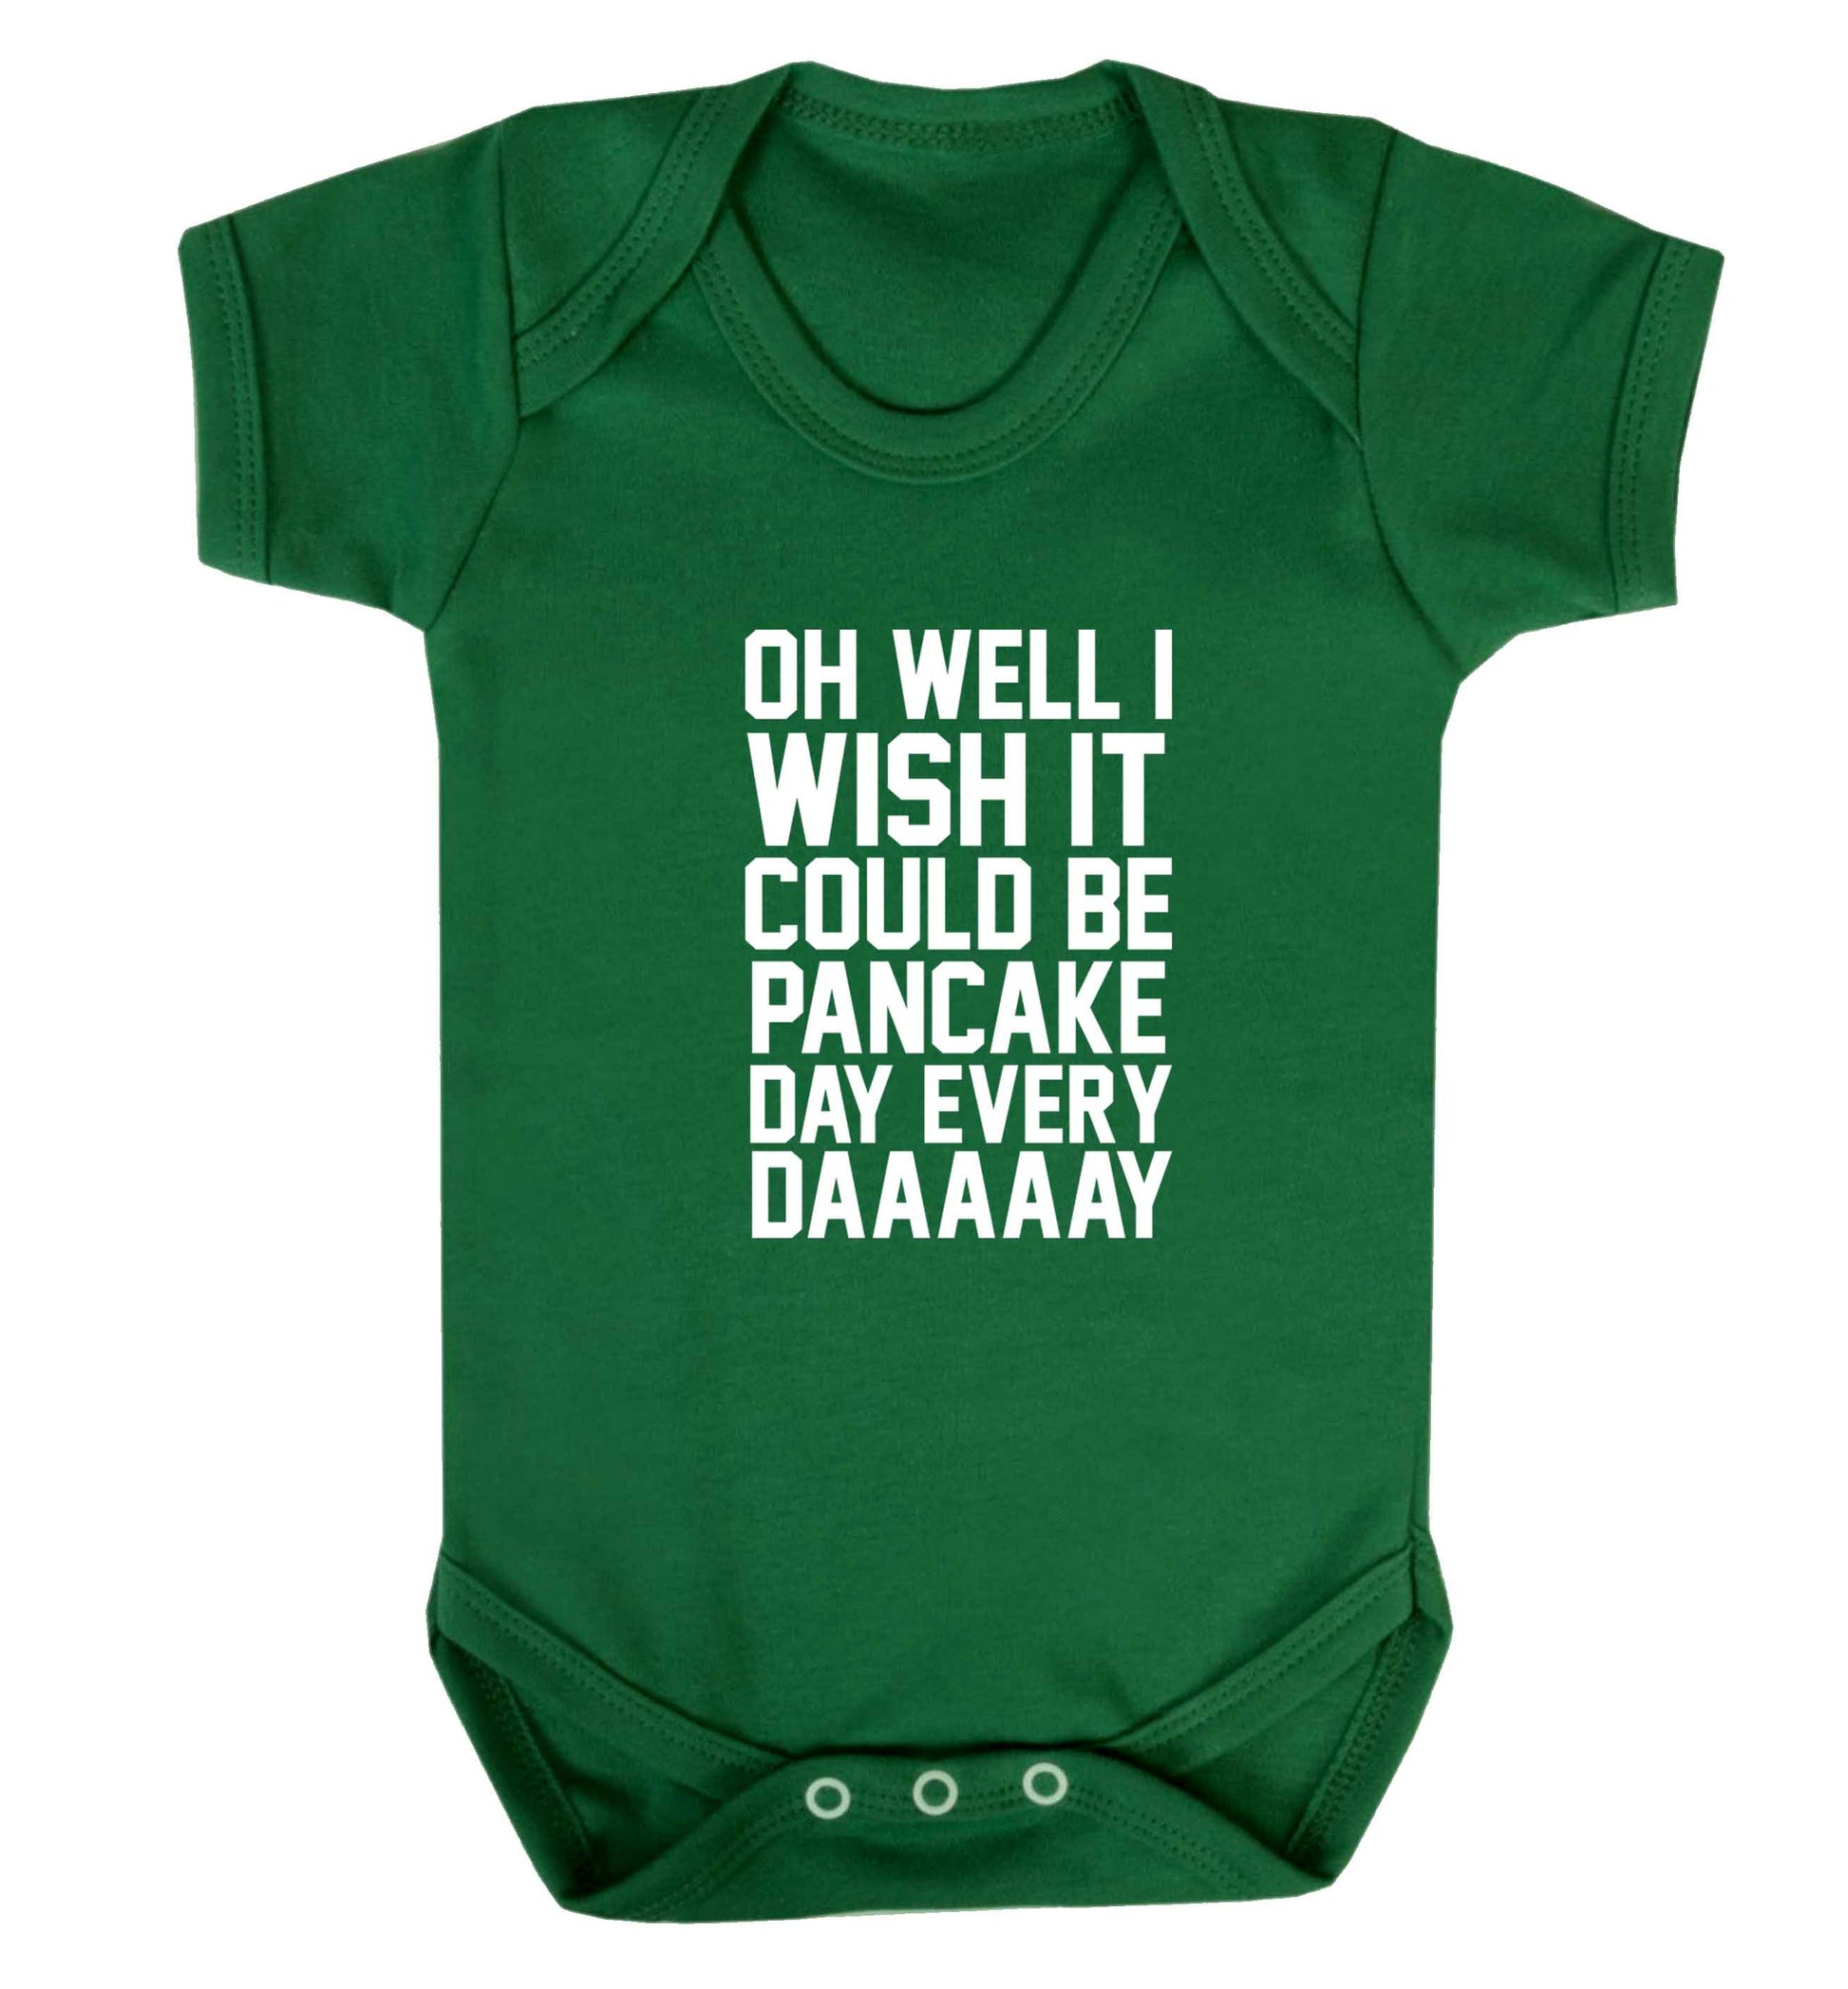 Oh well I wish it could be pancake day every day baby vest green 18-24 months